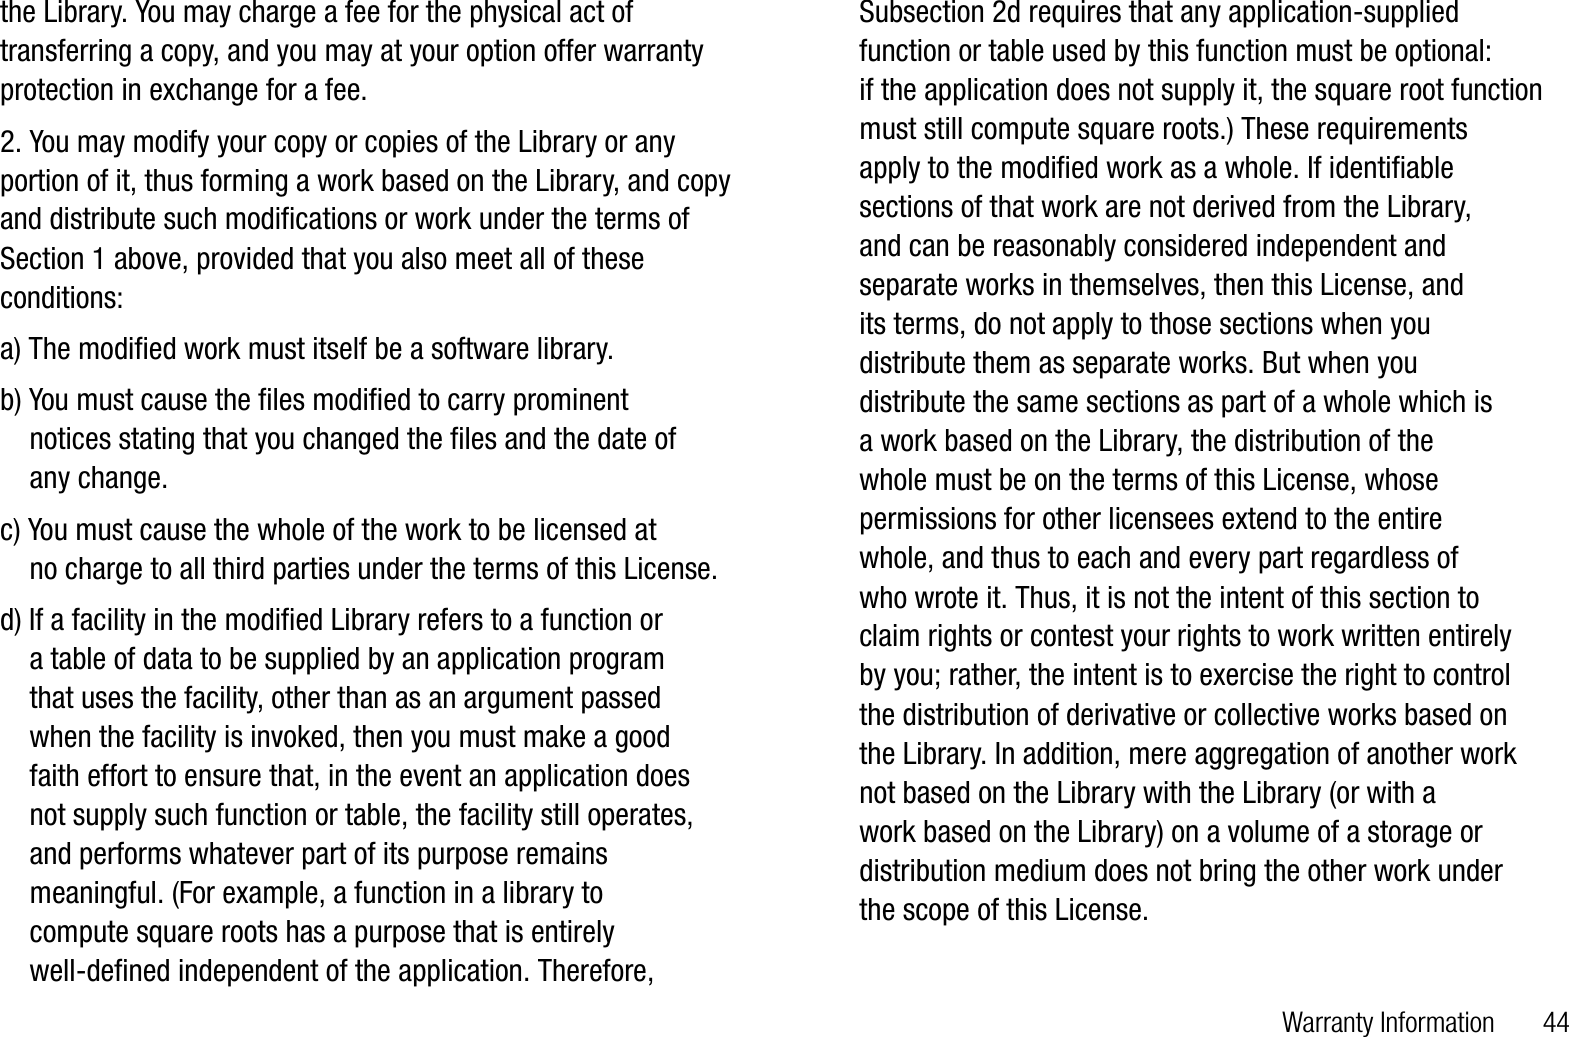 Warranty Information       44the Library. You may charge a fee for the physical act of transferring a copy, and you may at your option offer warranty protection in exchange for a fee. 2. You may modify your copy or copies of the Library or any portion of it, thus forming a work based on the Library, and copy and distribute such modifications or work under the terms of Section 1 above, provided that you also meet all of these conditions:a) The modified work must itself be a software library. b) You must cause the files modified to carry prominent     notices stating that you changed the files and the date of     any change.c) You must cause the whole of the work to be licensed at     no charge to all third parties under the terms of this License.d) If a facility in the modified Library refers to a function or     a table of data to be supplied by an application program     that uses the facility, other than as an argument passed    when the facility is invoked, then you must make a good     faith effort to ensure that, in the event an application does     not supply such function or table, the facility still operates,    and performs whatever part of its purpose remains    meaningful. (For example, a function in a library to     compute square roots has a purpose that is entirely     well-defined independent of the application. Therefore,    Subsection 2d requires that any application-supplied    function or table used by this function must be optional:     if the application does not supply it, the square root function    must still compute square roots.) These requirements     apply to the modified work as a whole. If identifiable     sections of that work are not derived from the Library,     and can be reasonably considered independent and    separate works in themselves, then this License, and     its terms, do not apply to those sections when you     distribute them as separate works. But when you     distribute the same sections as part of a whole which is     a work based on the Library, the distribution of the     whole must be on the terms of this License, whose    permissions for other licensees extend to the entire     whole, and thus to each and every part regardless of     who wrote it. Thus, it is not the intent of this section to     claim rights or contest your rights to work written entirely     by you; rather, the intent is to exercise the right to control     the distribution of derivative or collective works based on     the Library. In addition, mere aggregation of another work     not based on the Library with the Library (or with a     work based on the Library) on a volume of a storage or    distribution medium does not bring the other work under     the scope of this License.